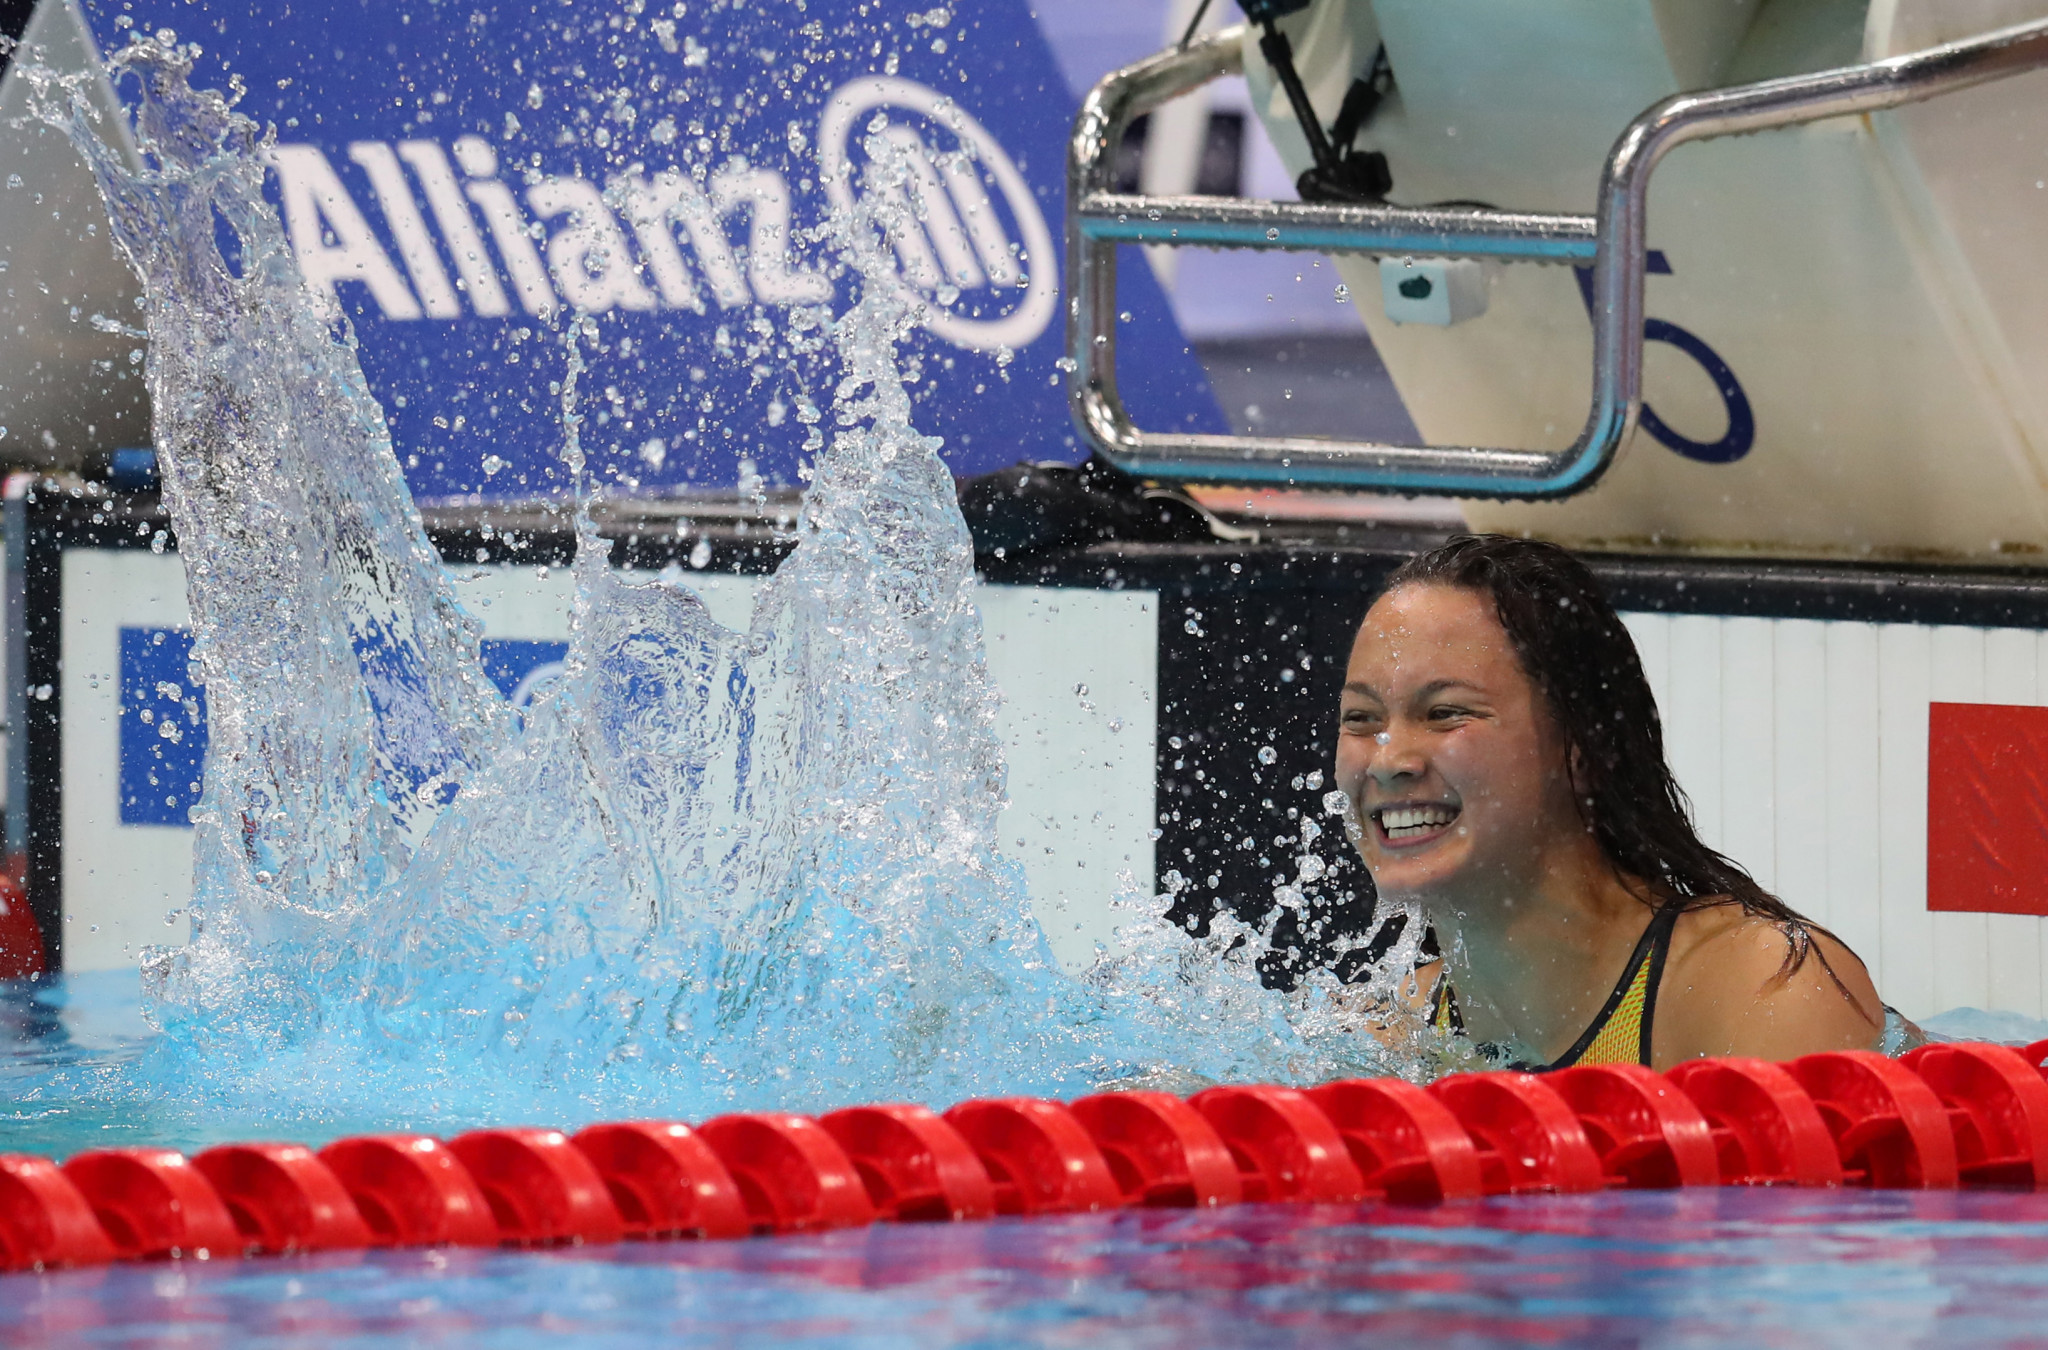 British swimmer Alice Tai has won six world titles at the 2019 World Swimming Championships in London ©Getty Images 